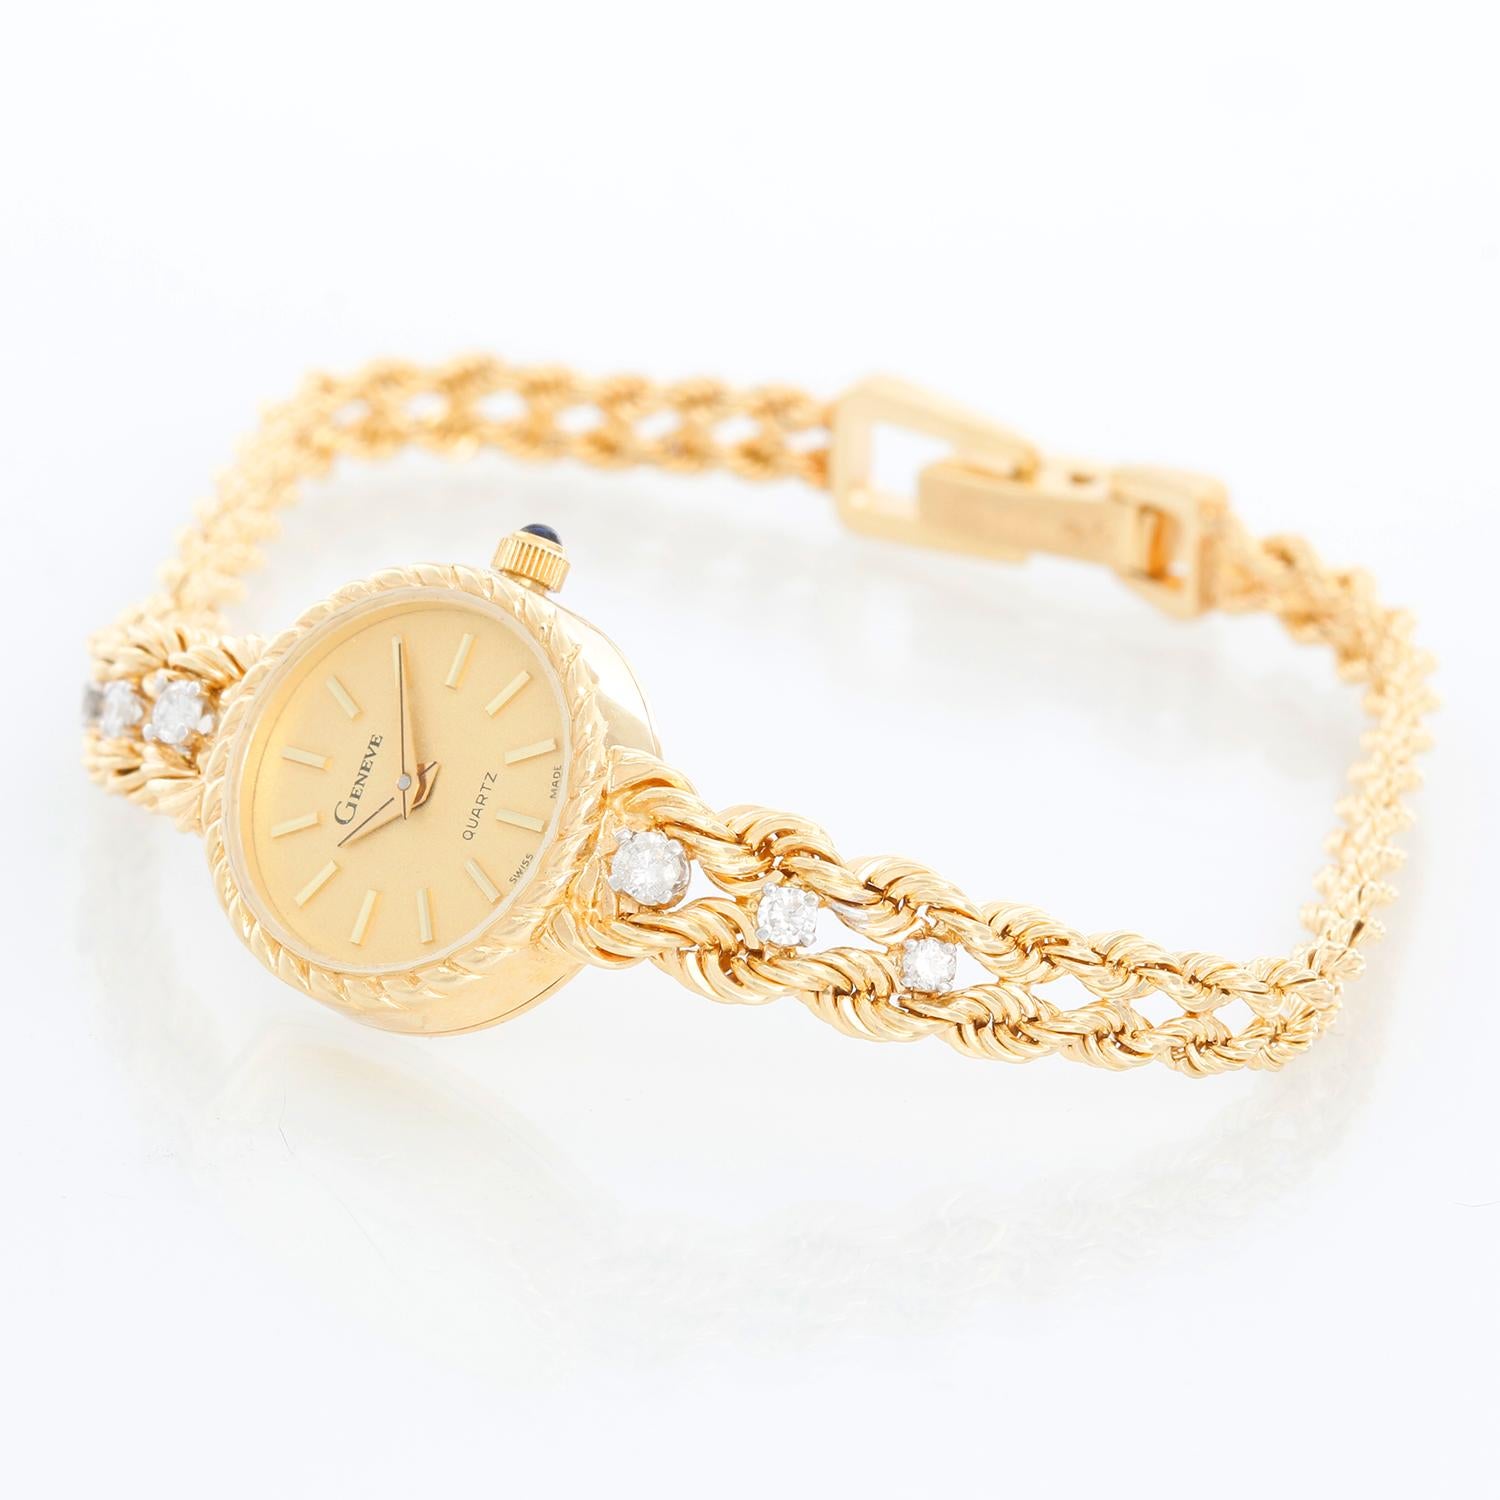 Geneve Classic 14K Yellow Gold Ladies Watch - Quartz. 14K Yellow gold case ( 17 mm ). Champagne textured dial with stick hour markers. Two row bracelet with diamonds; will fit a 6.5 inch wrist. Pre-owned with custom box.